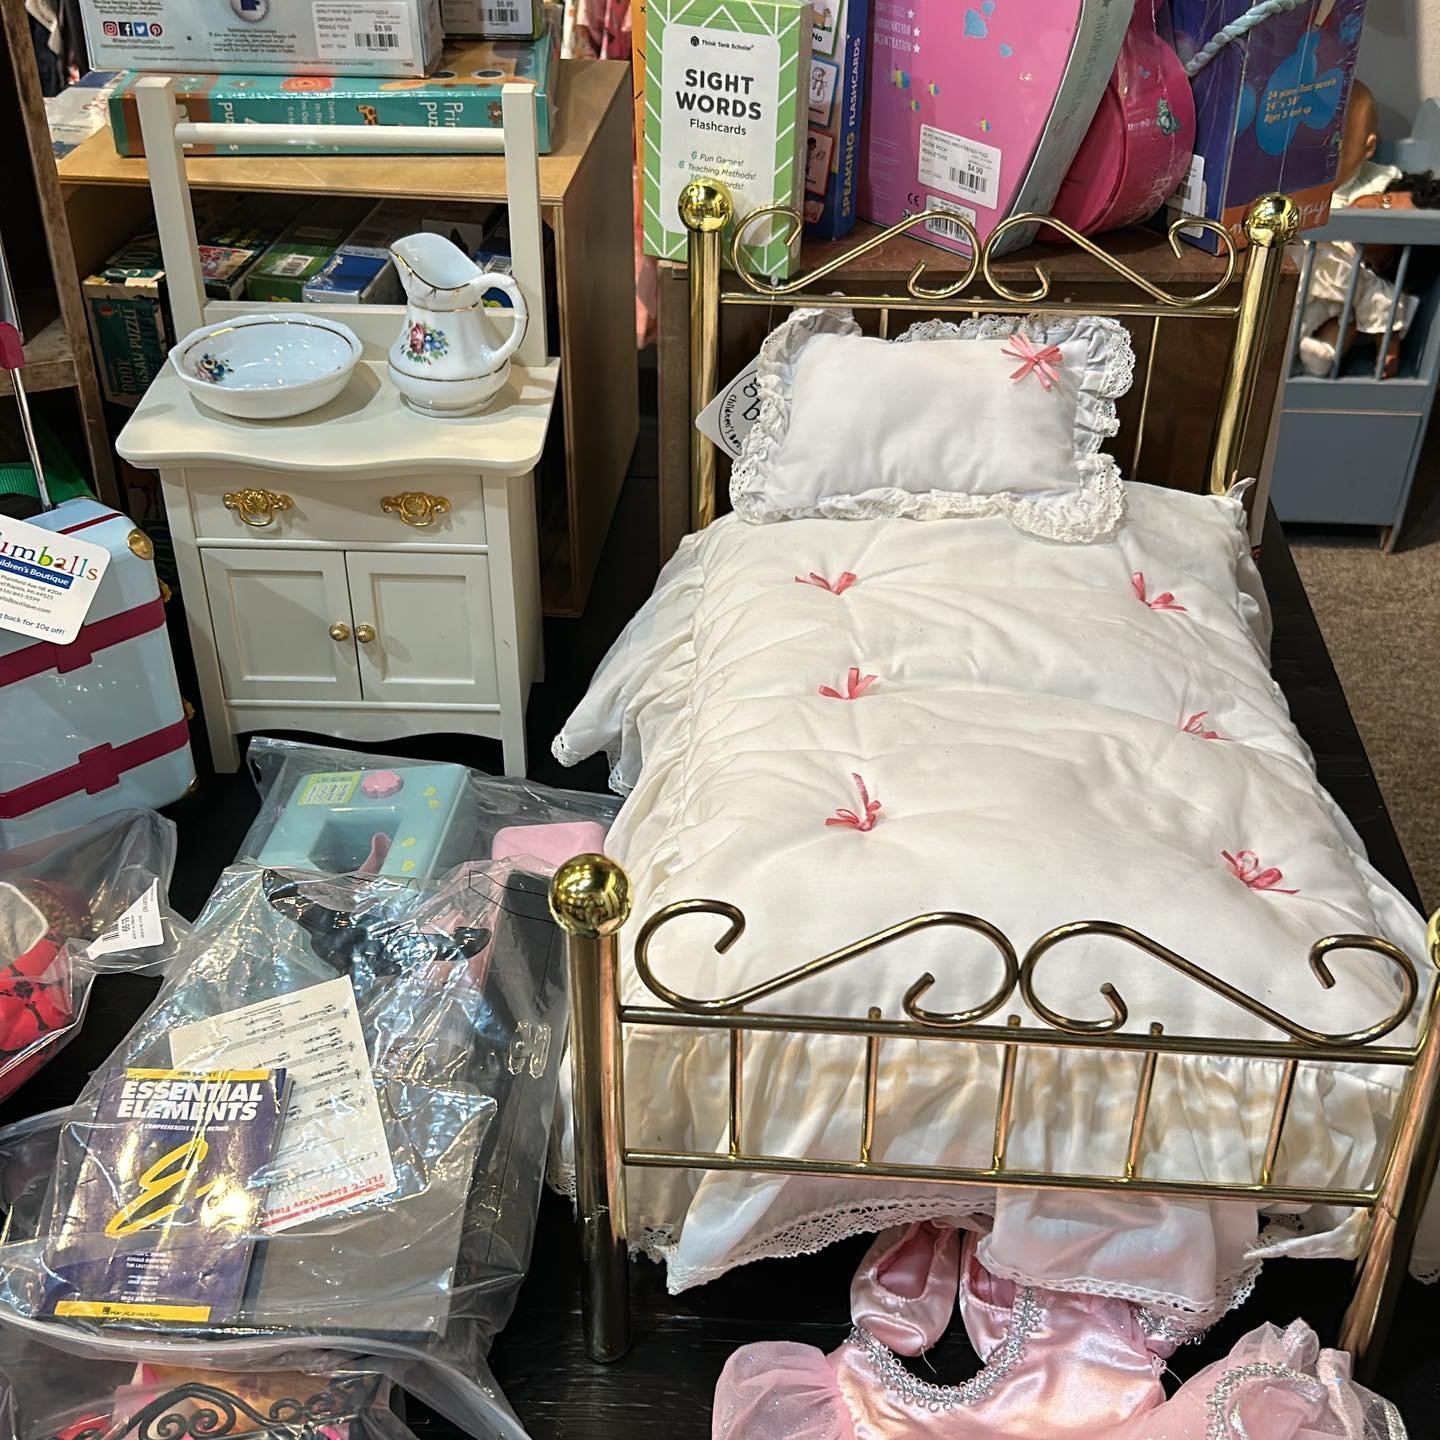 I&rsquo;m slowly working through the MASSIVE American Girl drop off! We have the classic books priced at $2.99 each, Samantha&rsquo;s bed with commode $49.99, pets $8.99-$10.99, Our Generation sewing/laundry items $10.99

So much more to come! Bins a